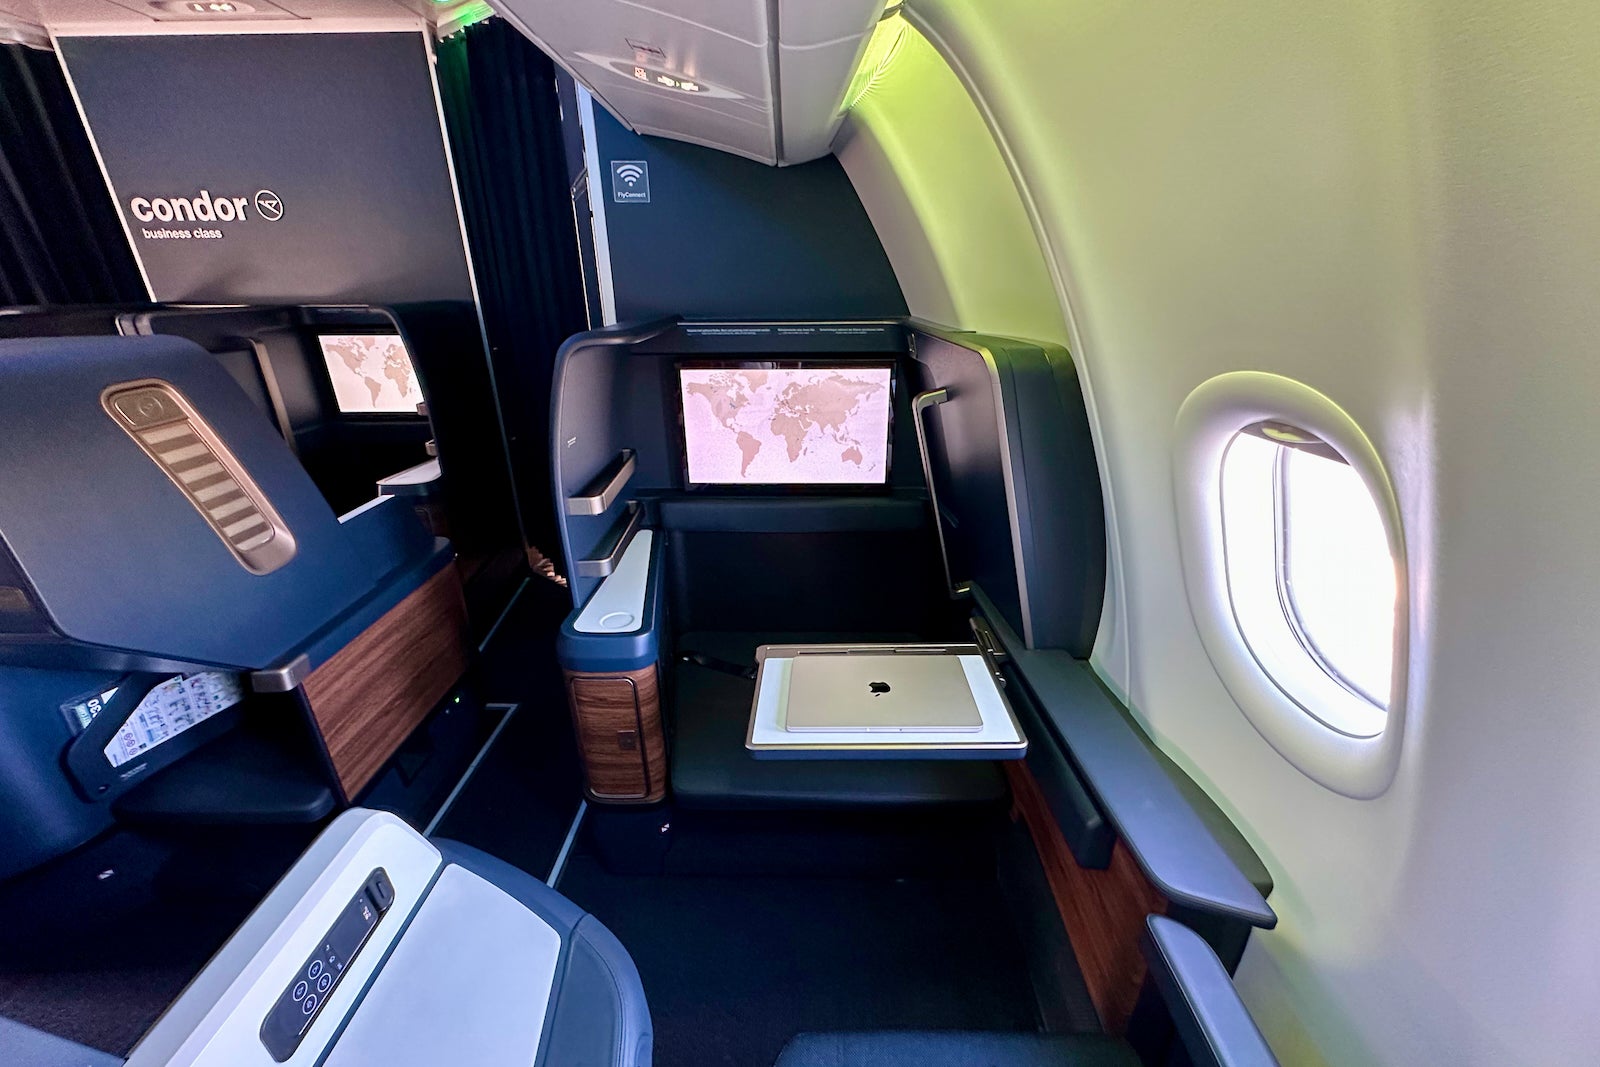 First look: Condor's new Airbus A330 cabins that are much nicer than  Lufthansa's - The Points Guy